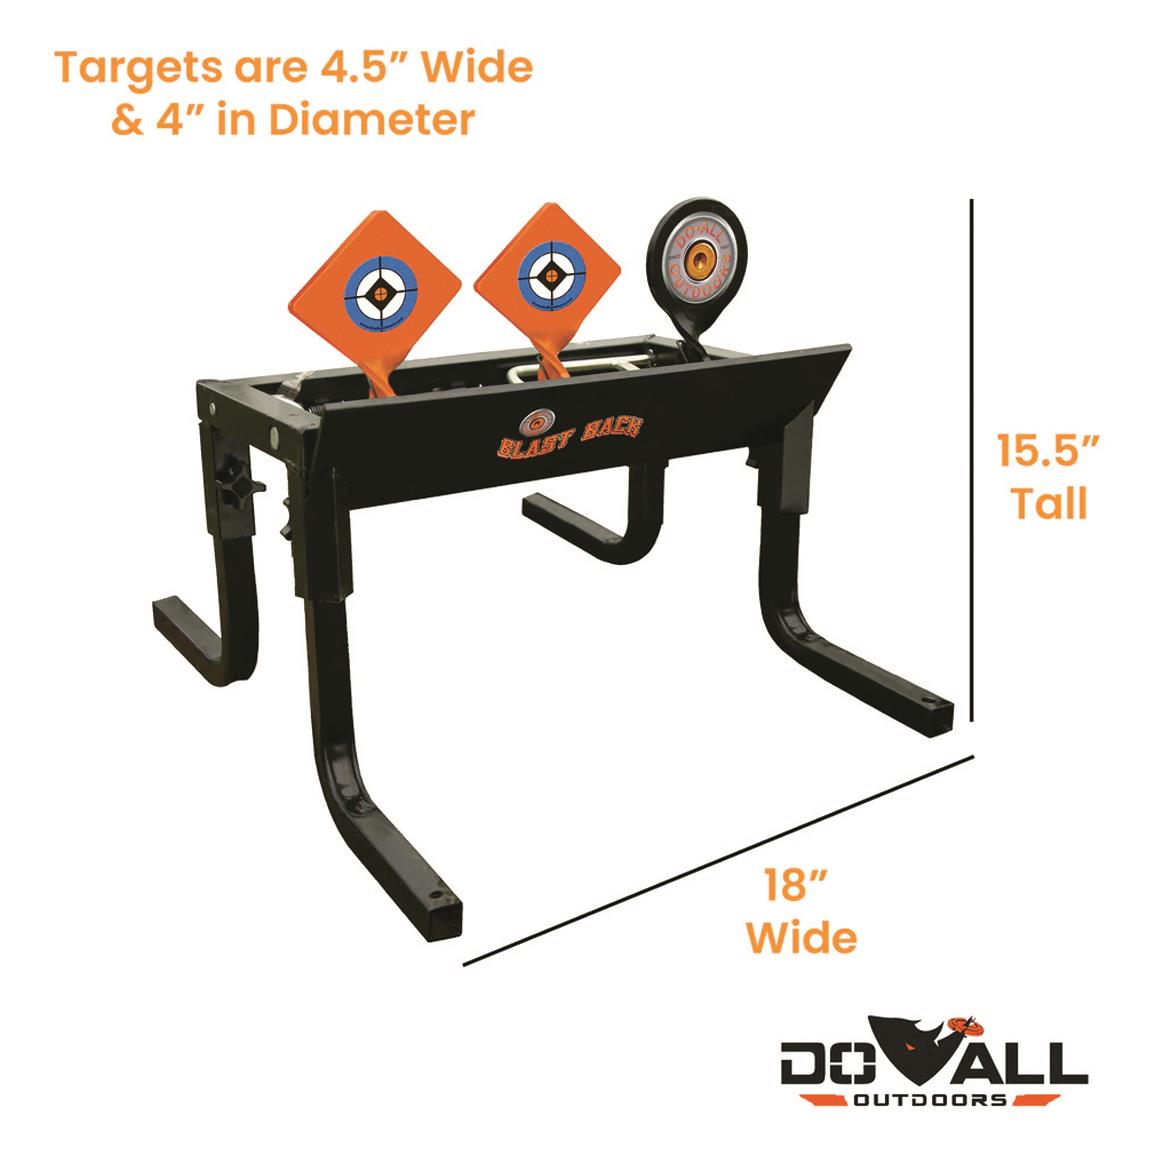 Do-All Outdoors Blast Back Automatic Pop-Up/Resetting Target, .17/.22